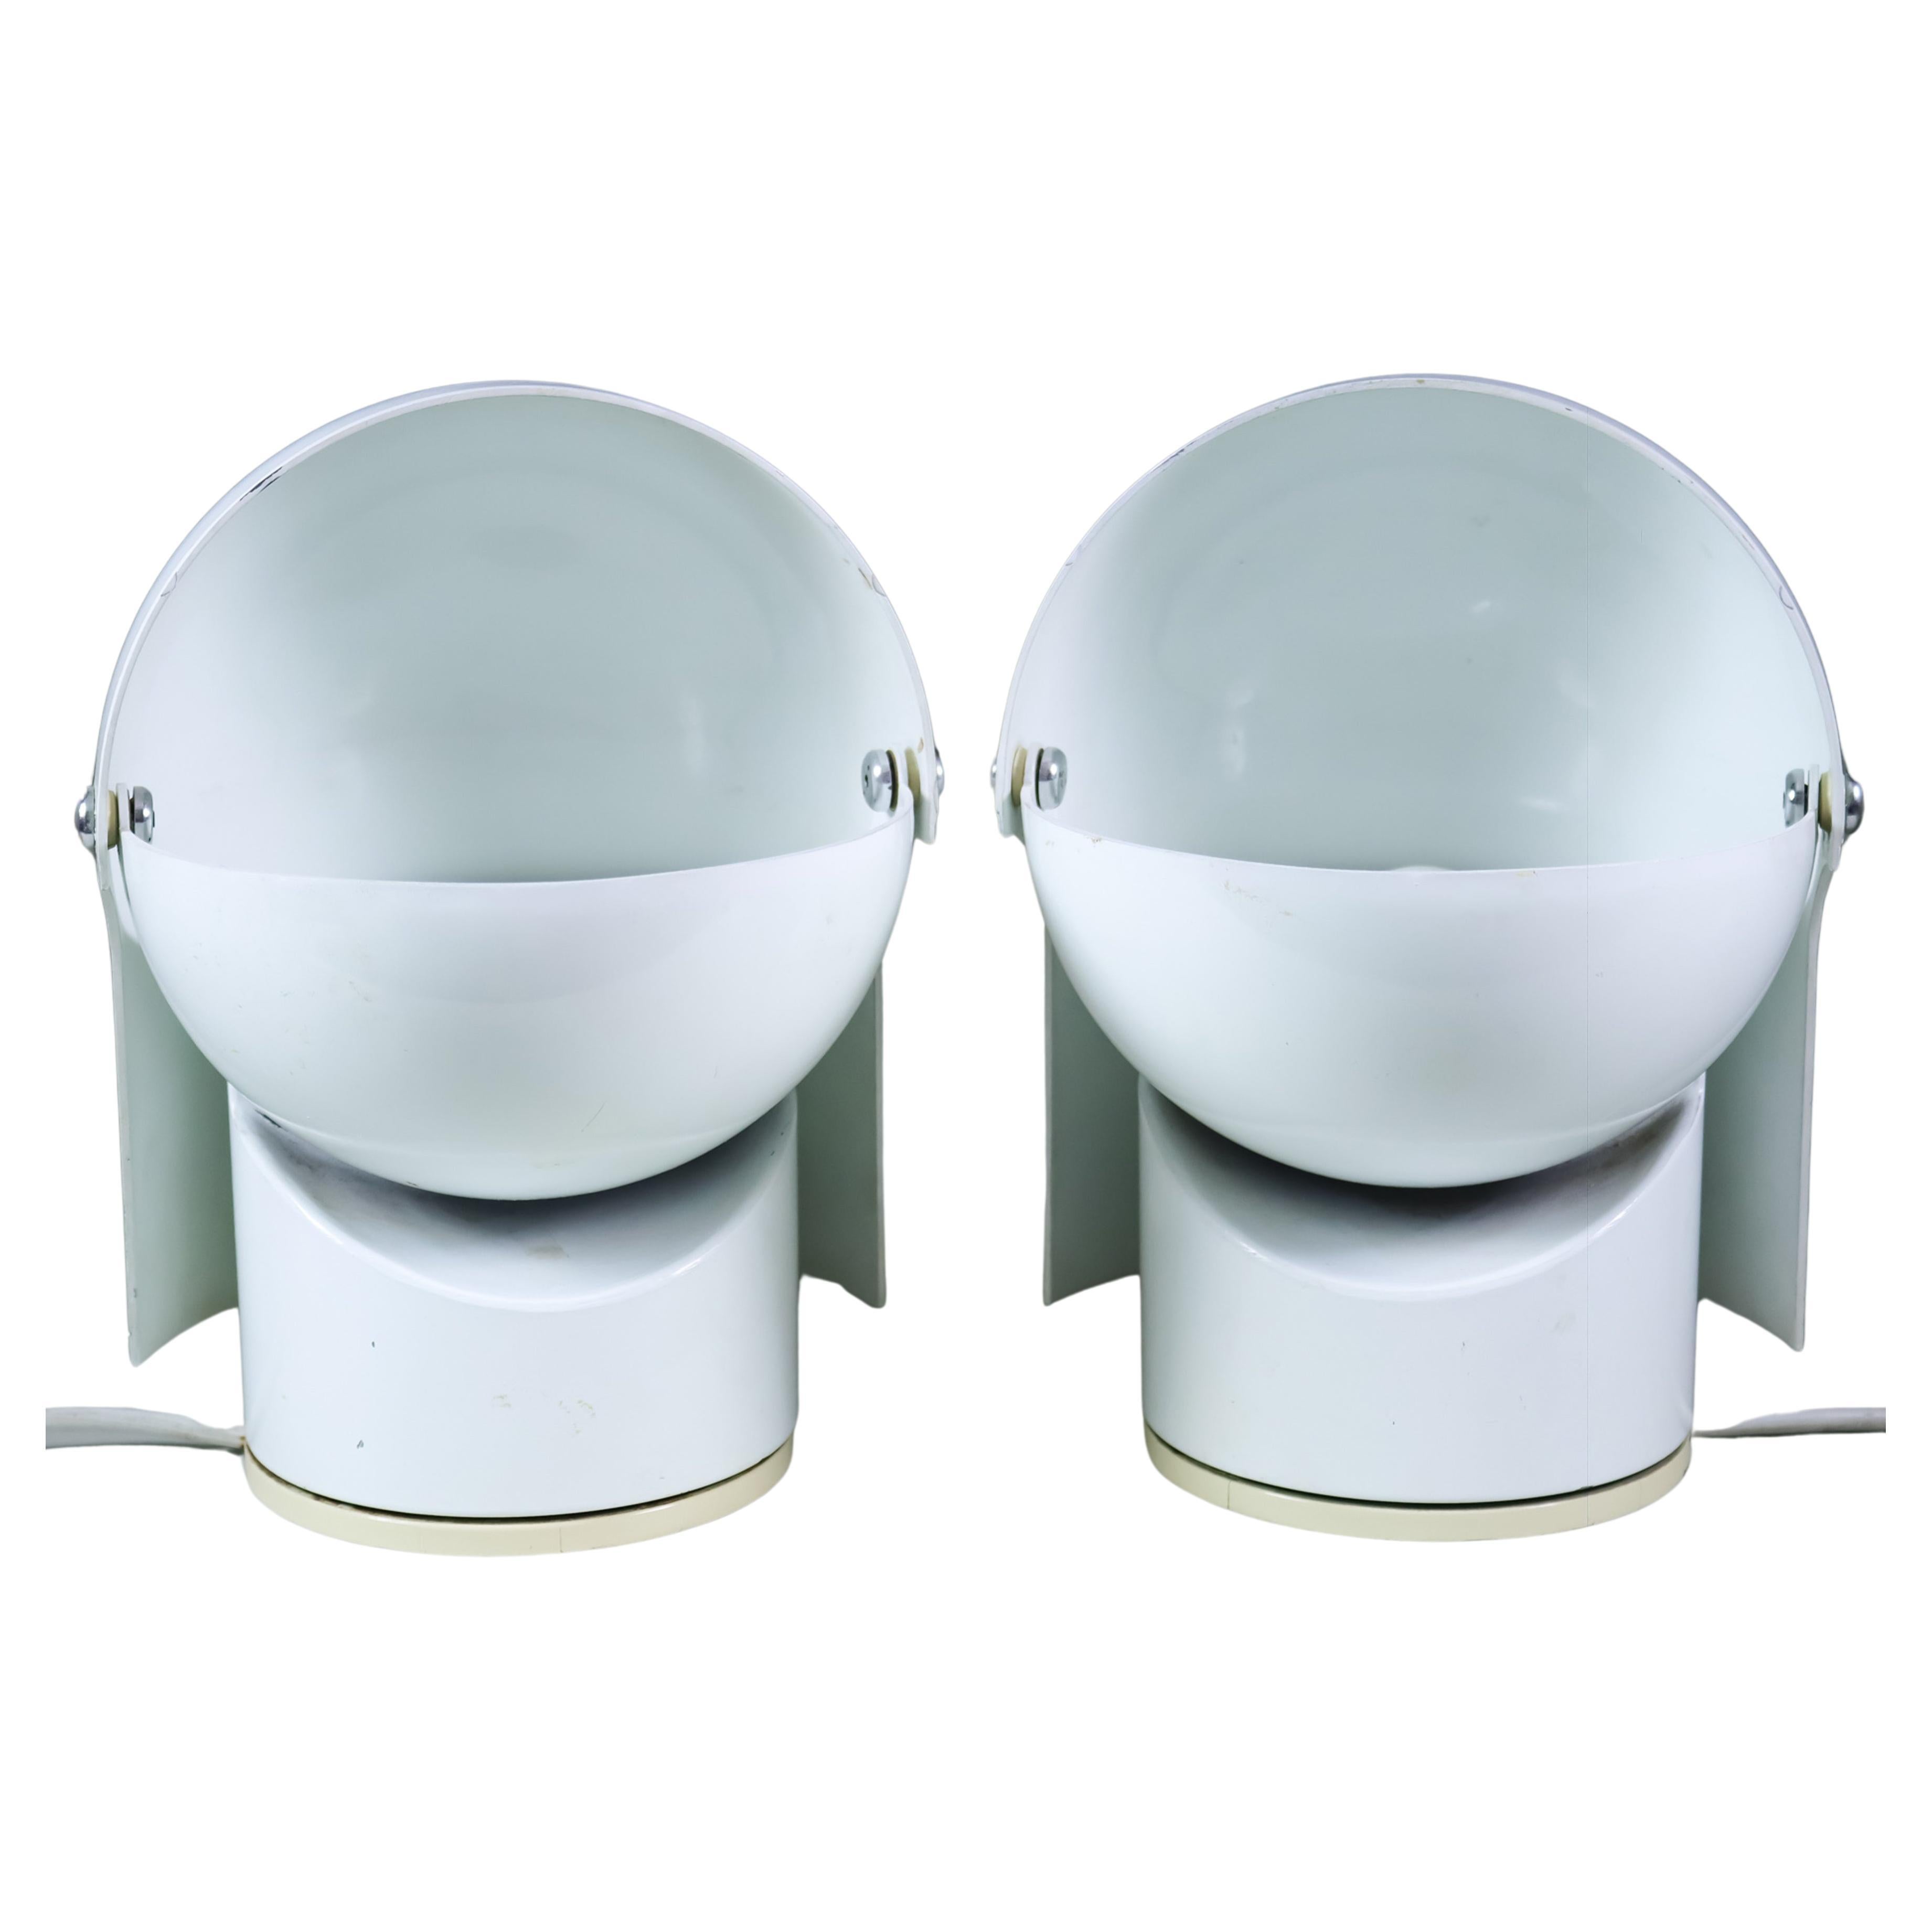 Pair of "Pileino" Table Lamps By Gae Aulenti For Artemide, 1972 For Sale